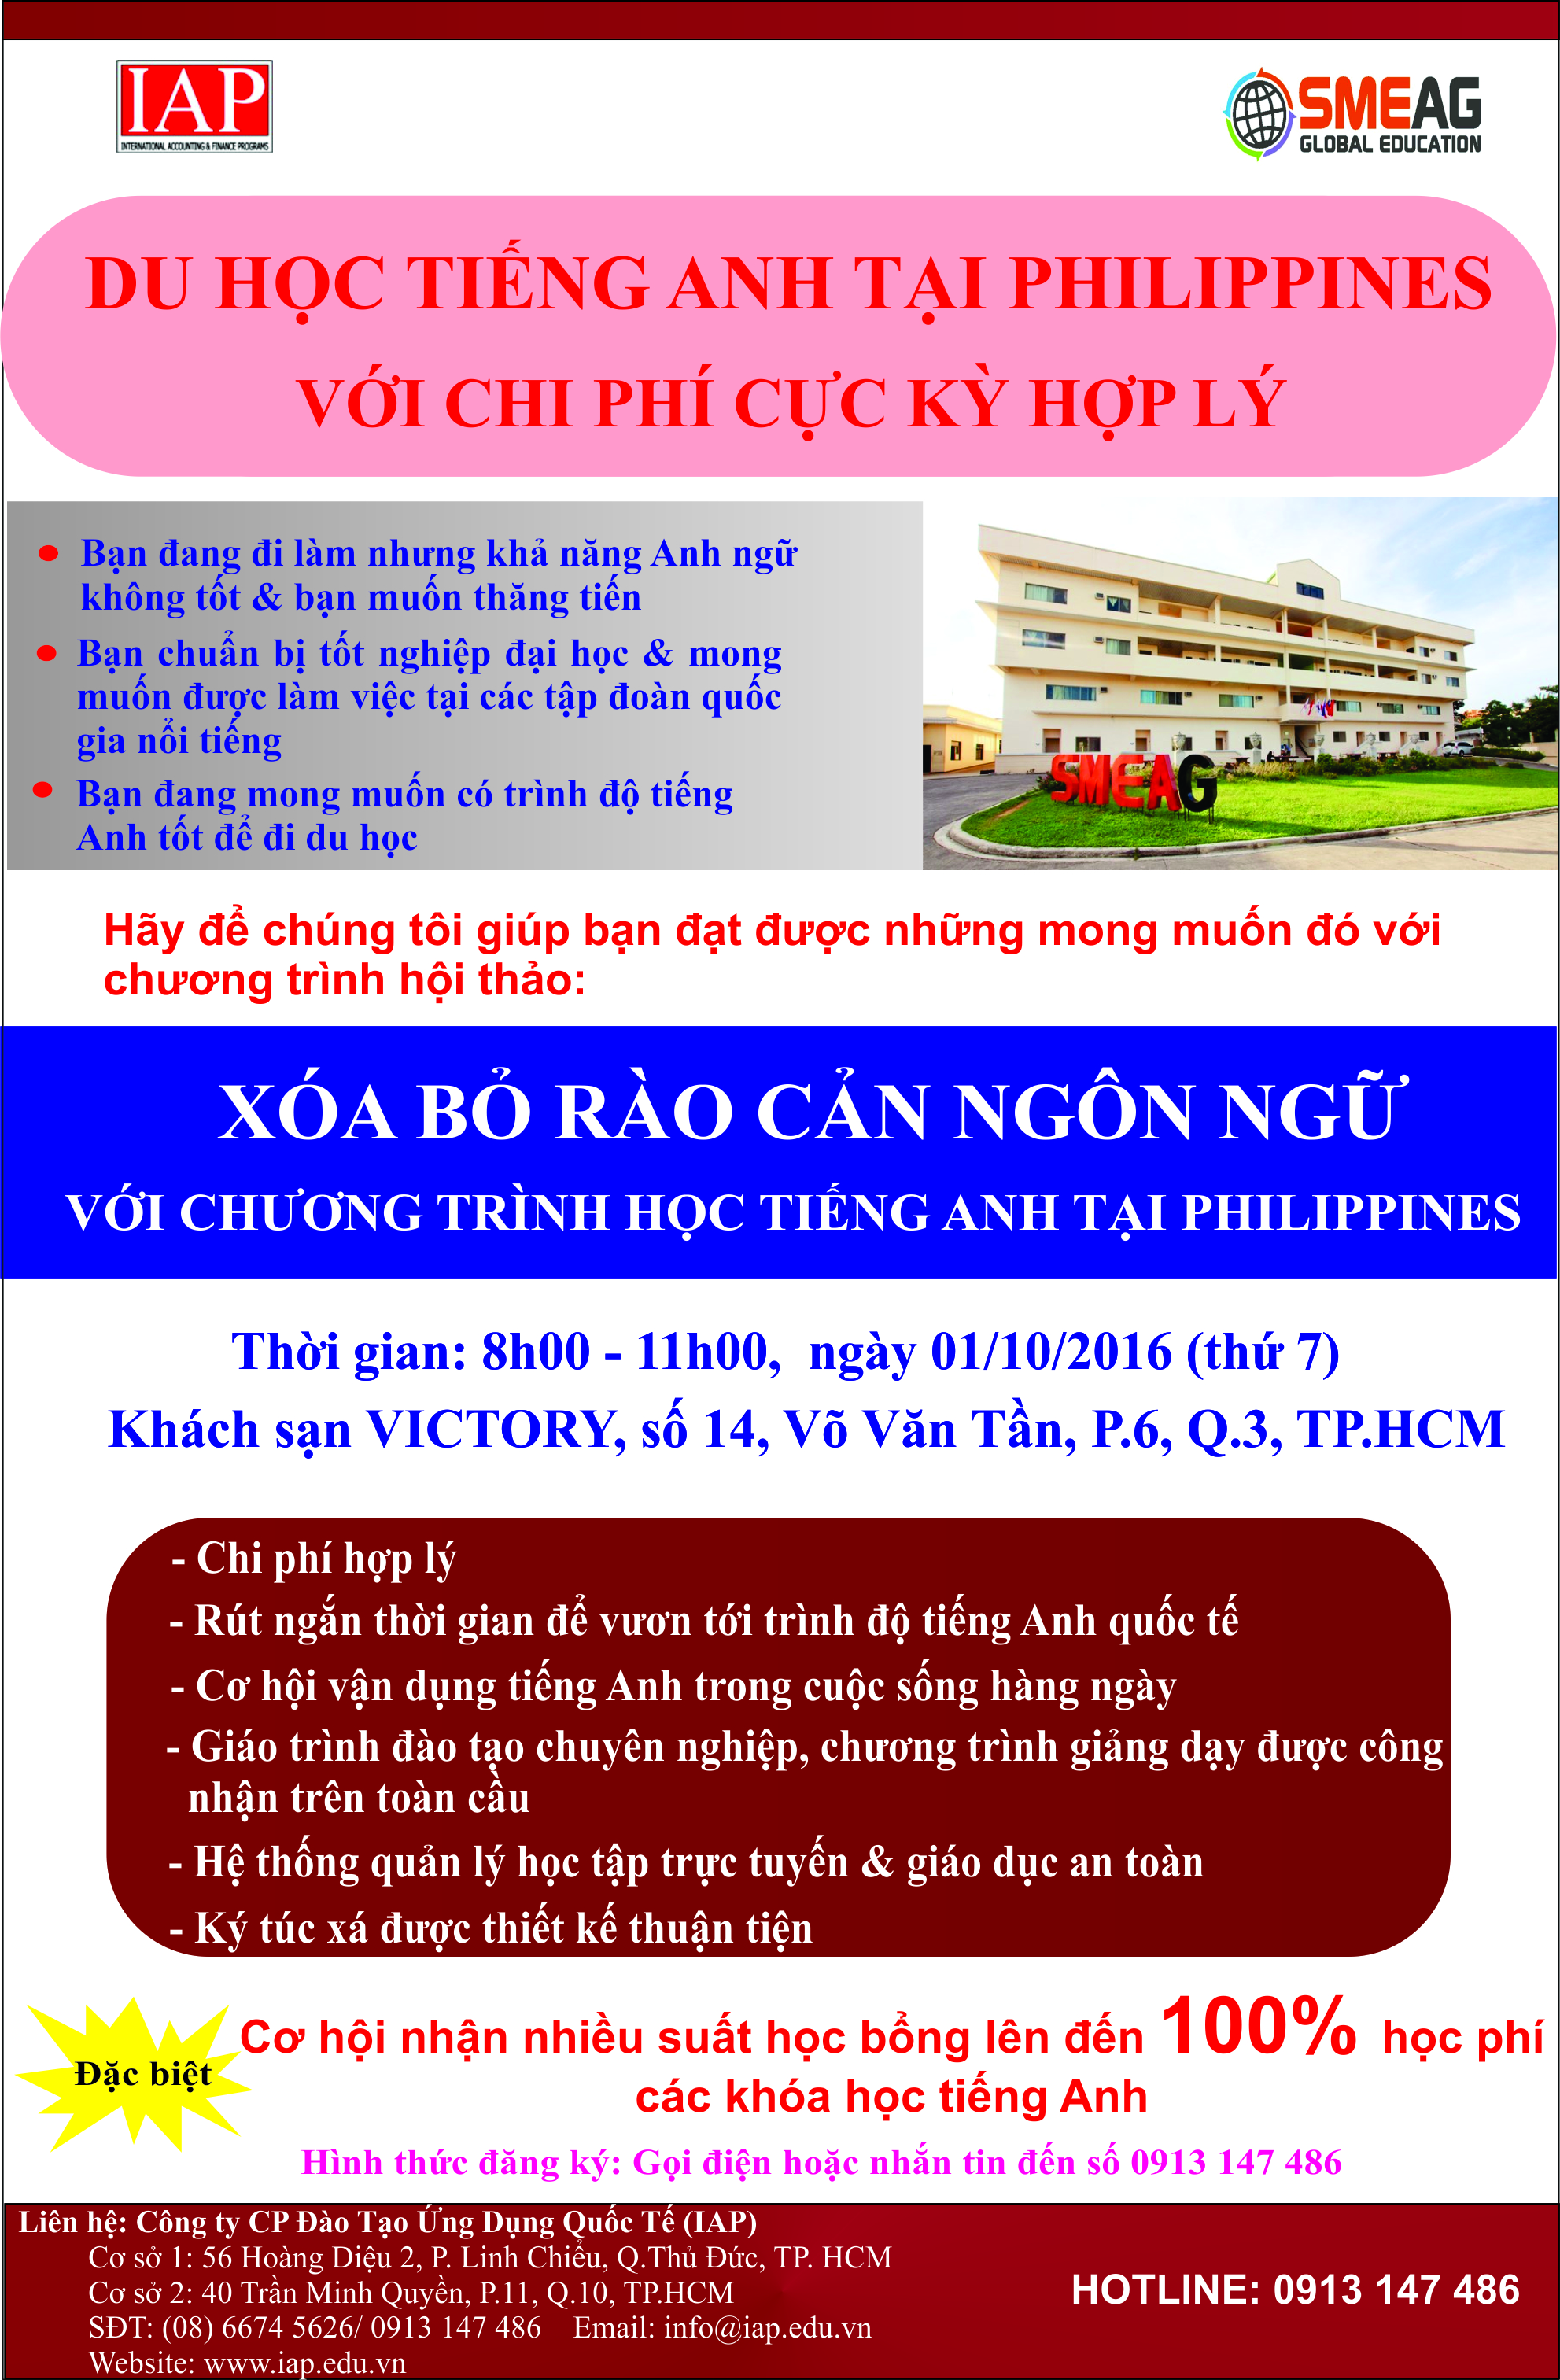 HỌC TIẾNG ANH TẠI PHILIPPINES